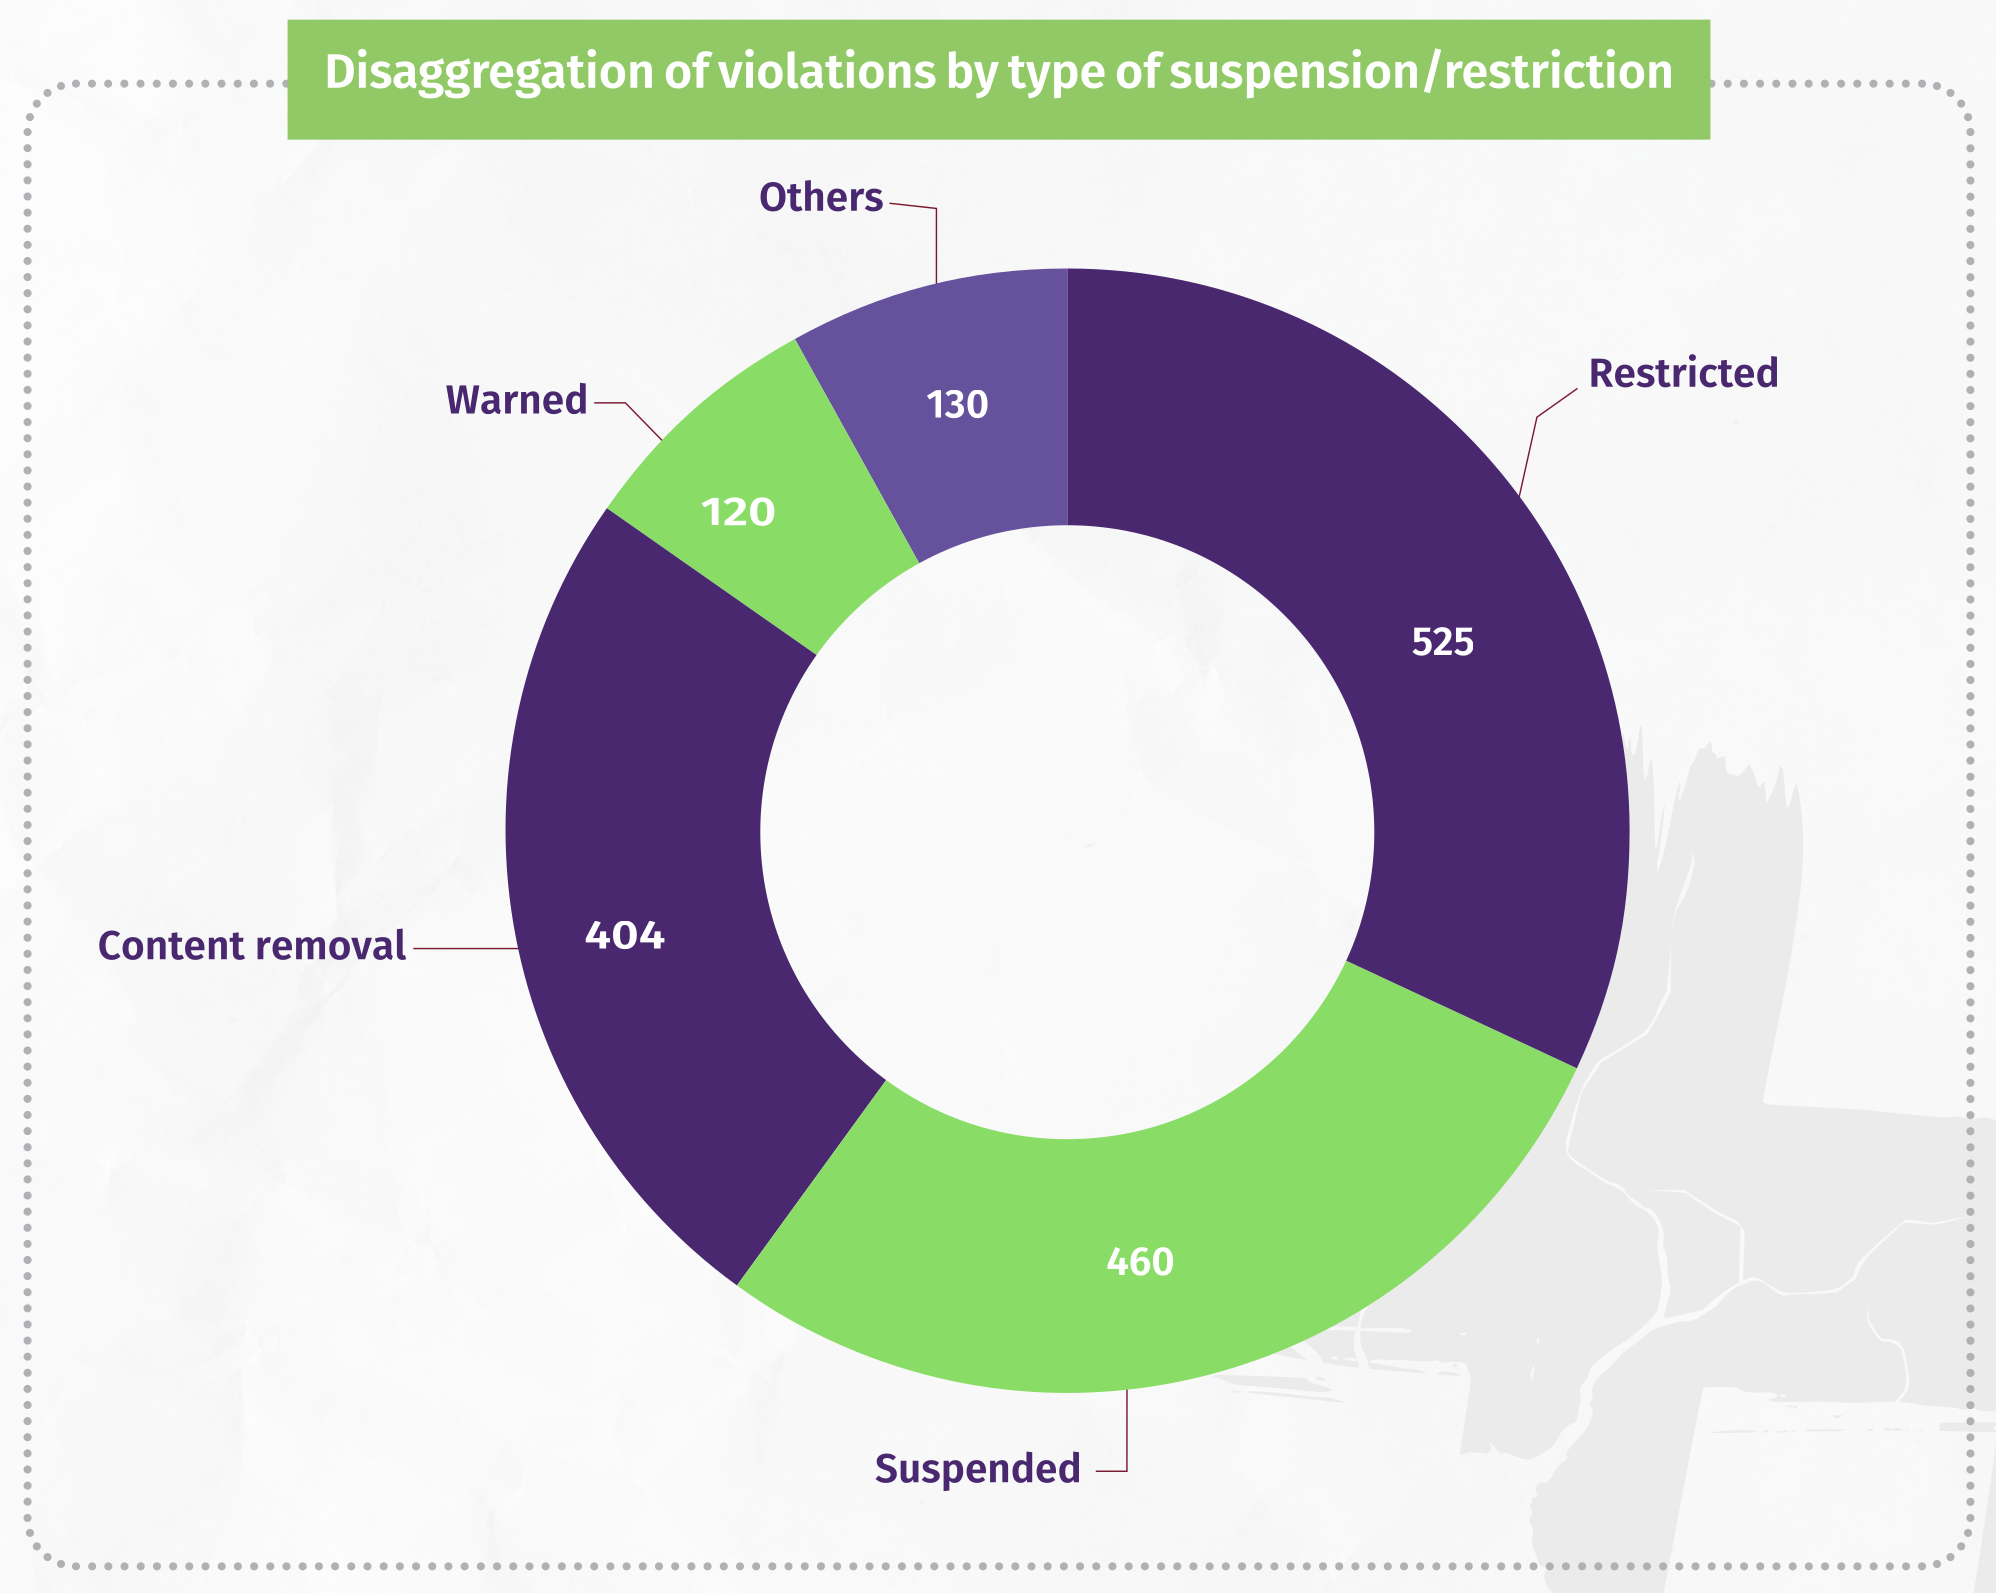 Of the 1,639 censorship violations documented by 7amleh, this graph depicts the disaggregation of violations by type of suspension/restriction. Image courtesy of 7amleh.